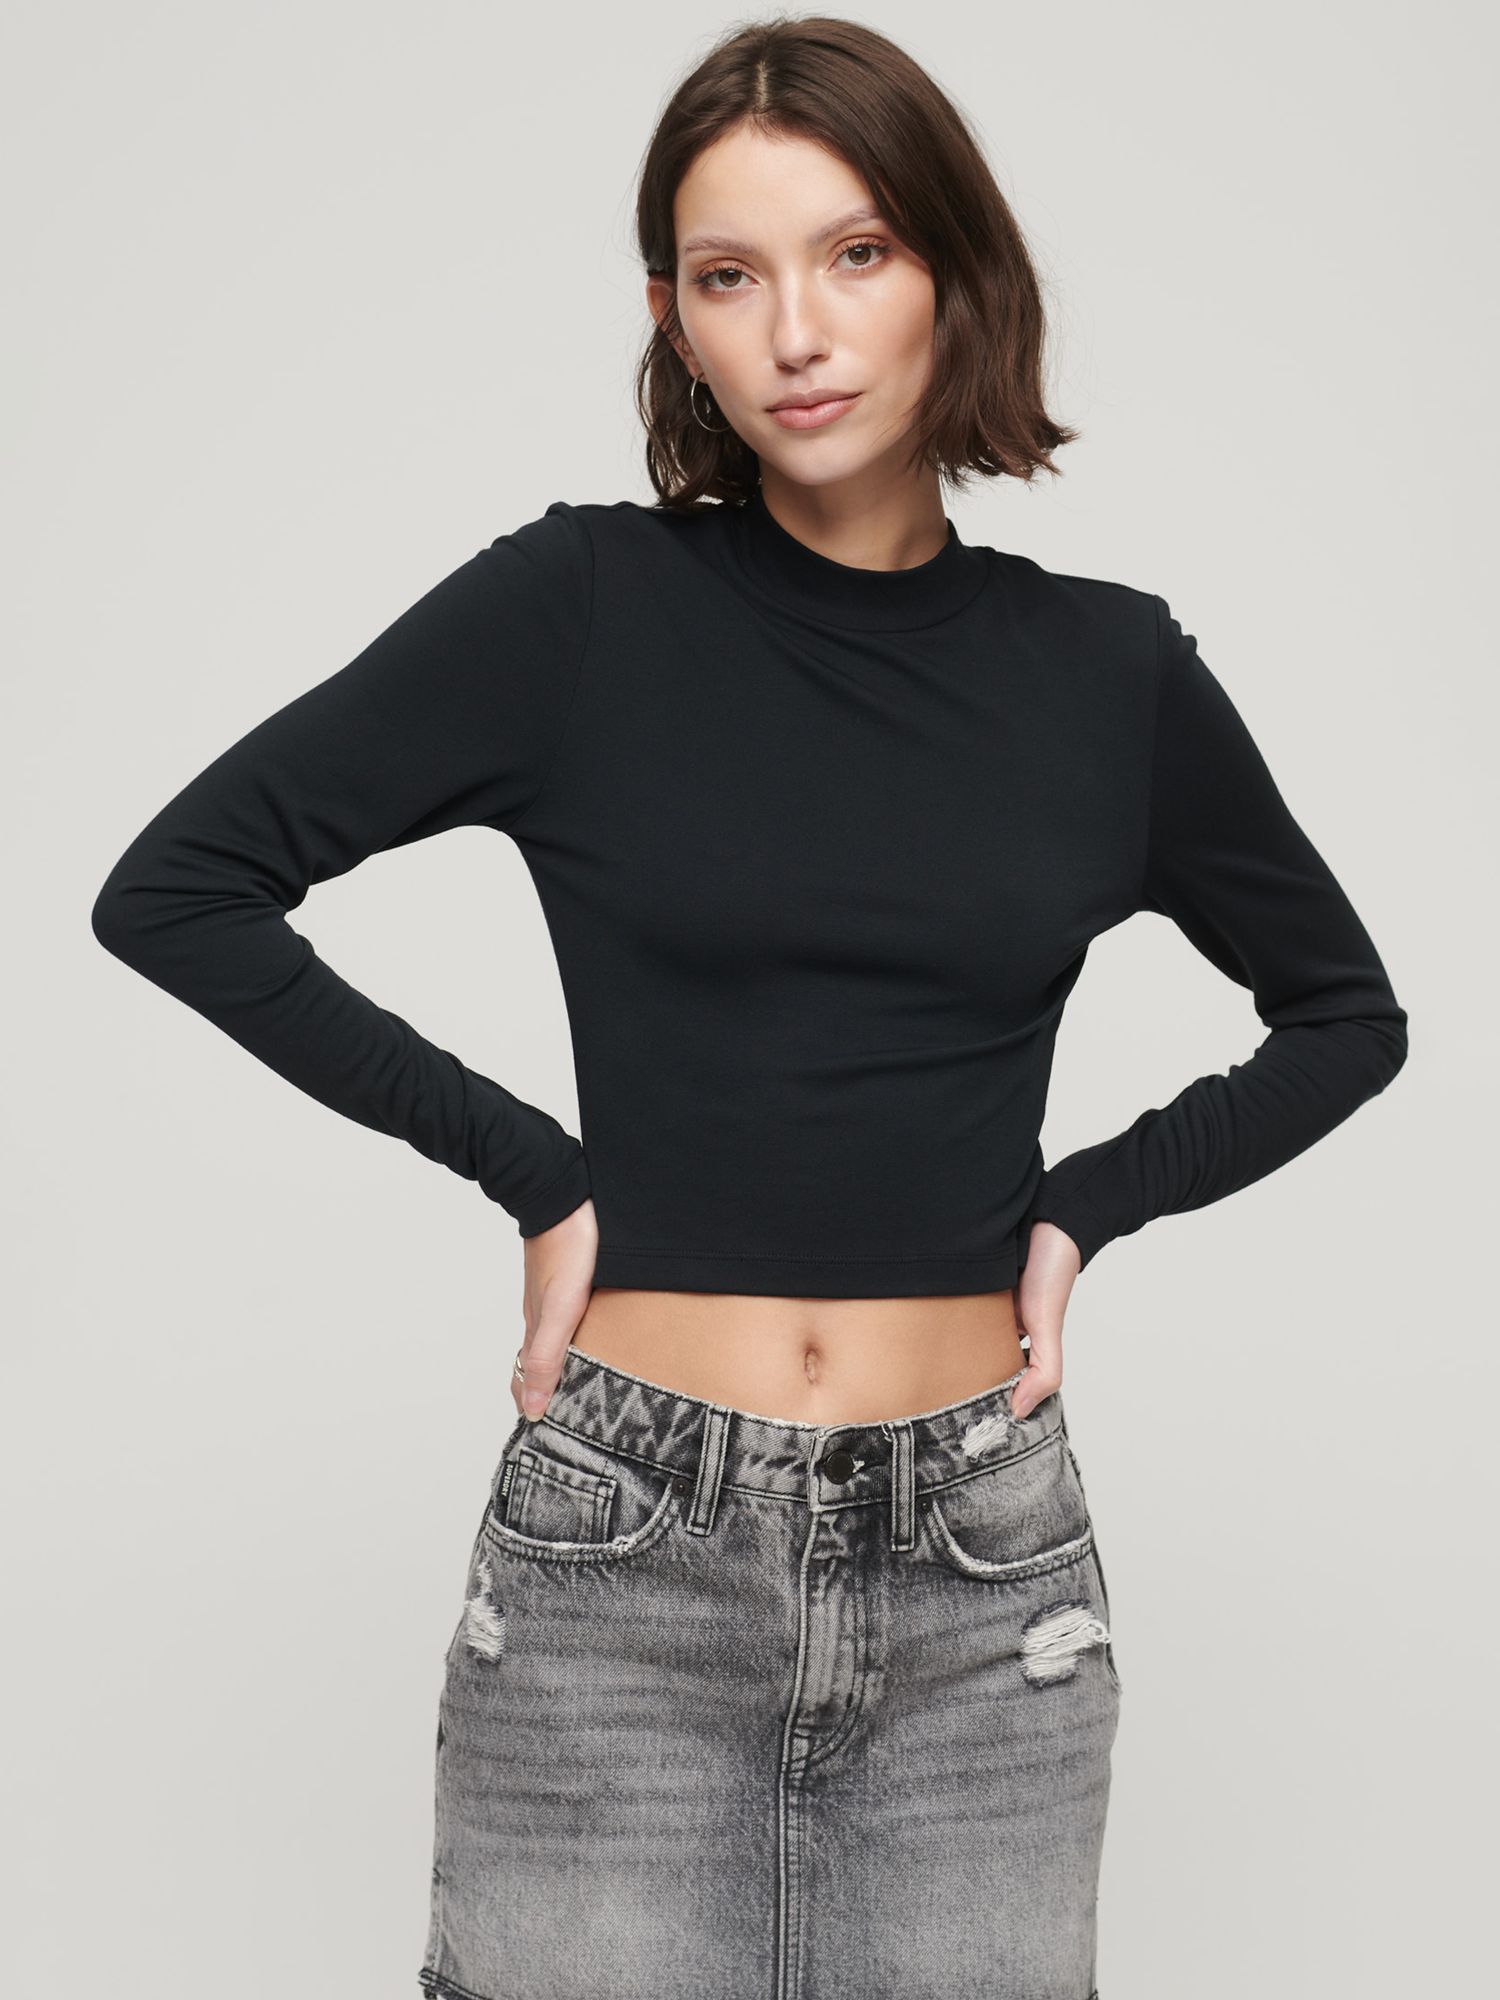 Superdry Long Sleeve Jersey Open Back Top, Black at John Lewis & Partners